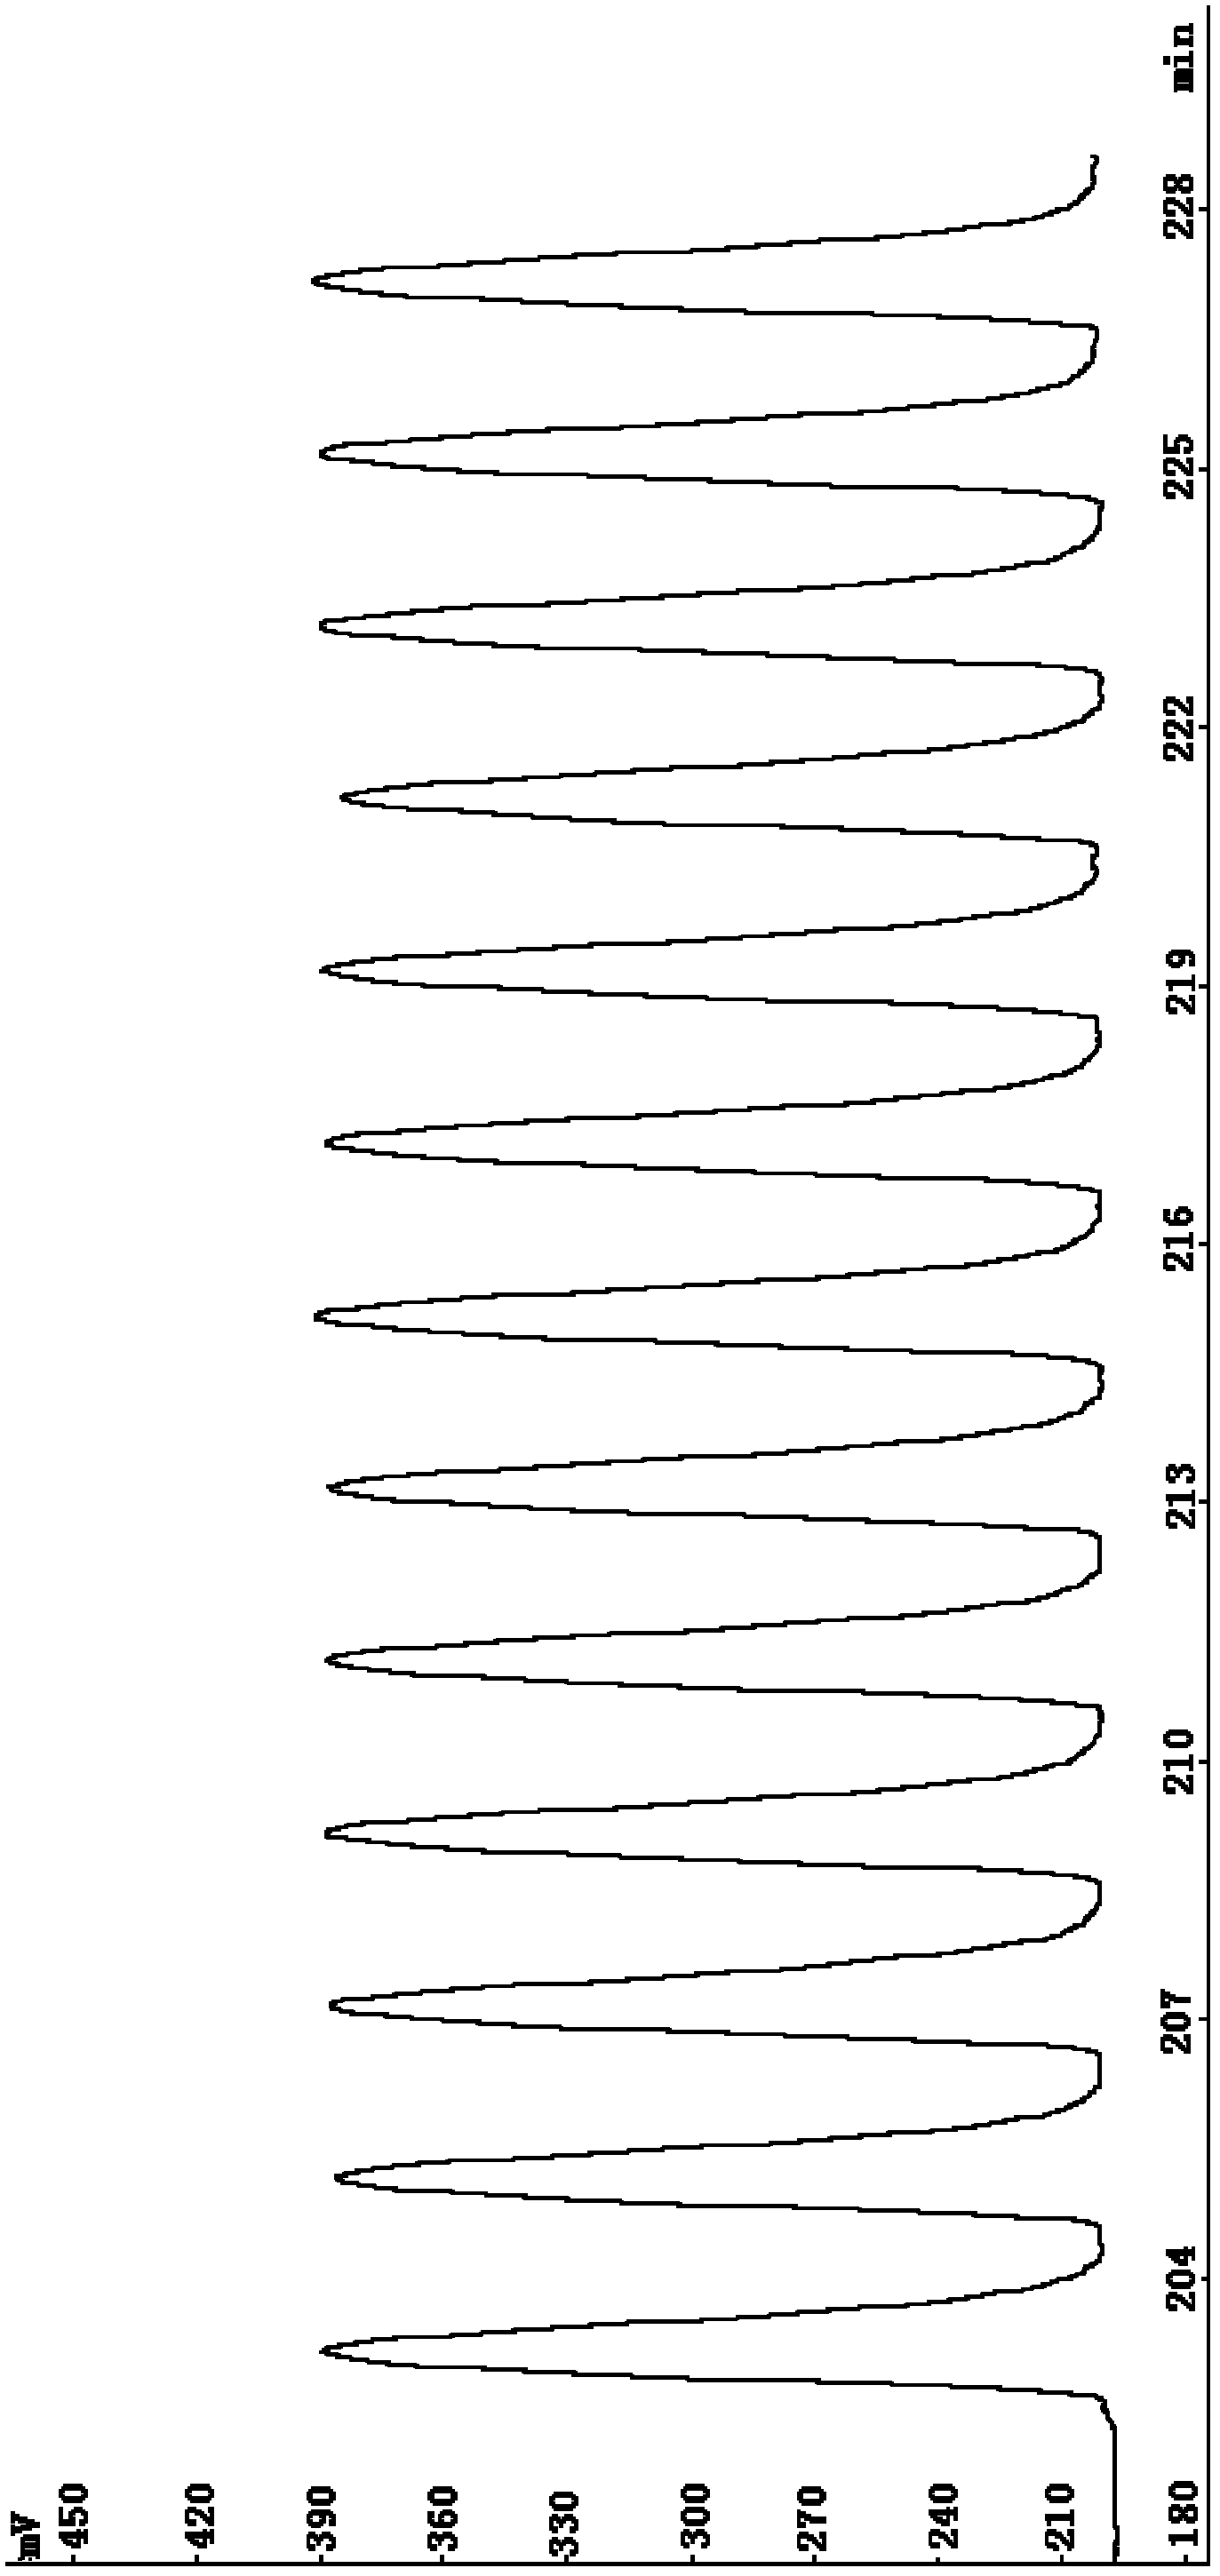 Method for automatically analyzing sulfide in water sample